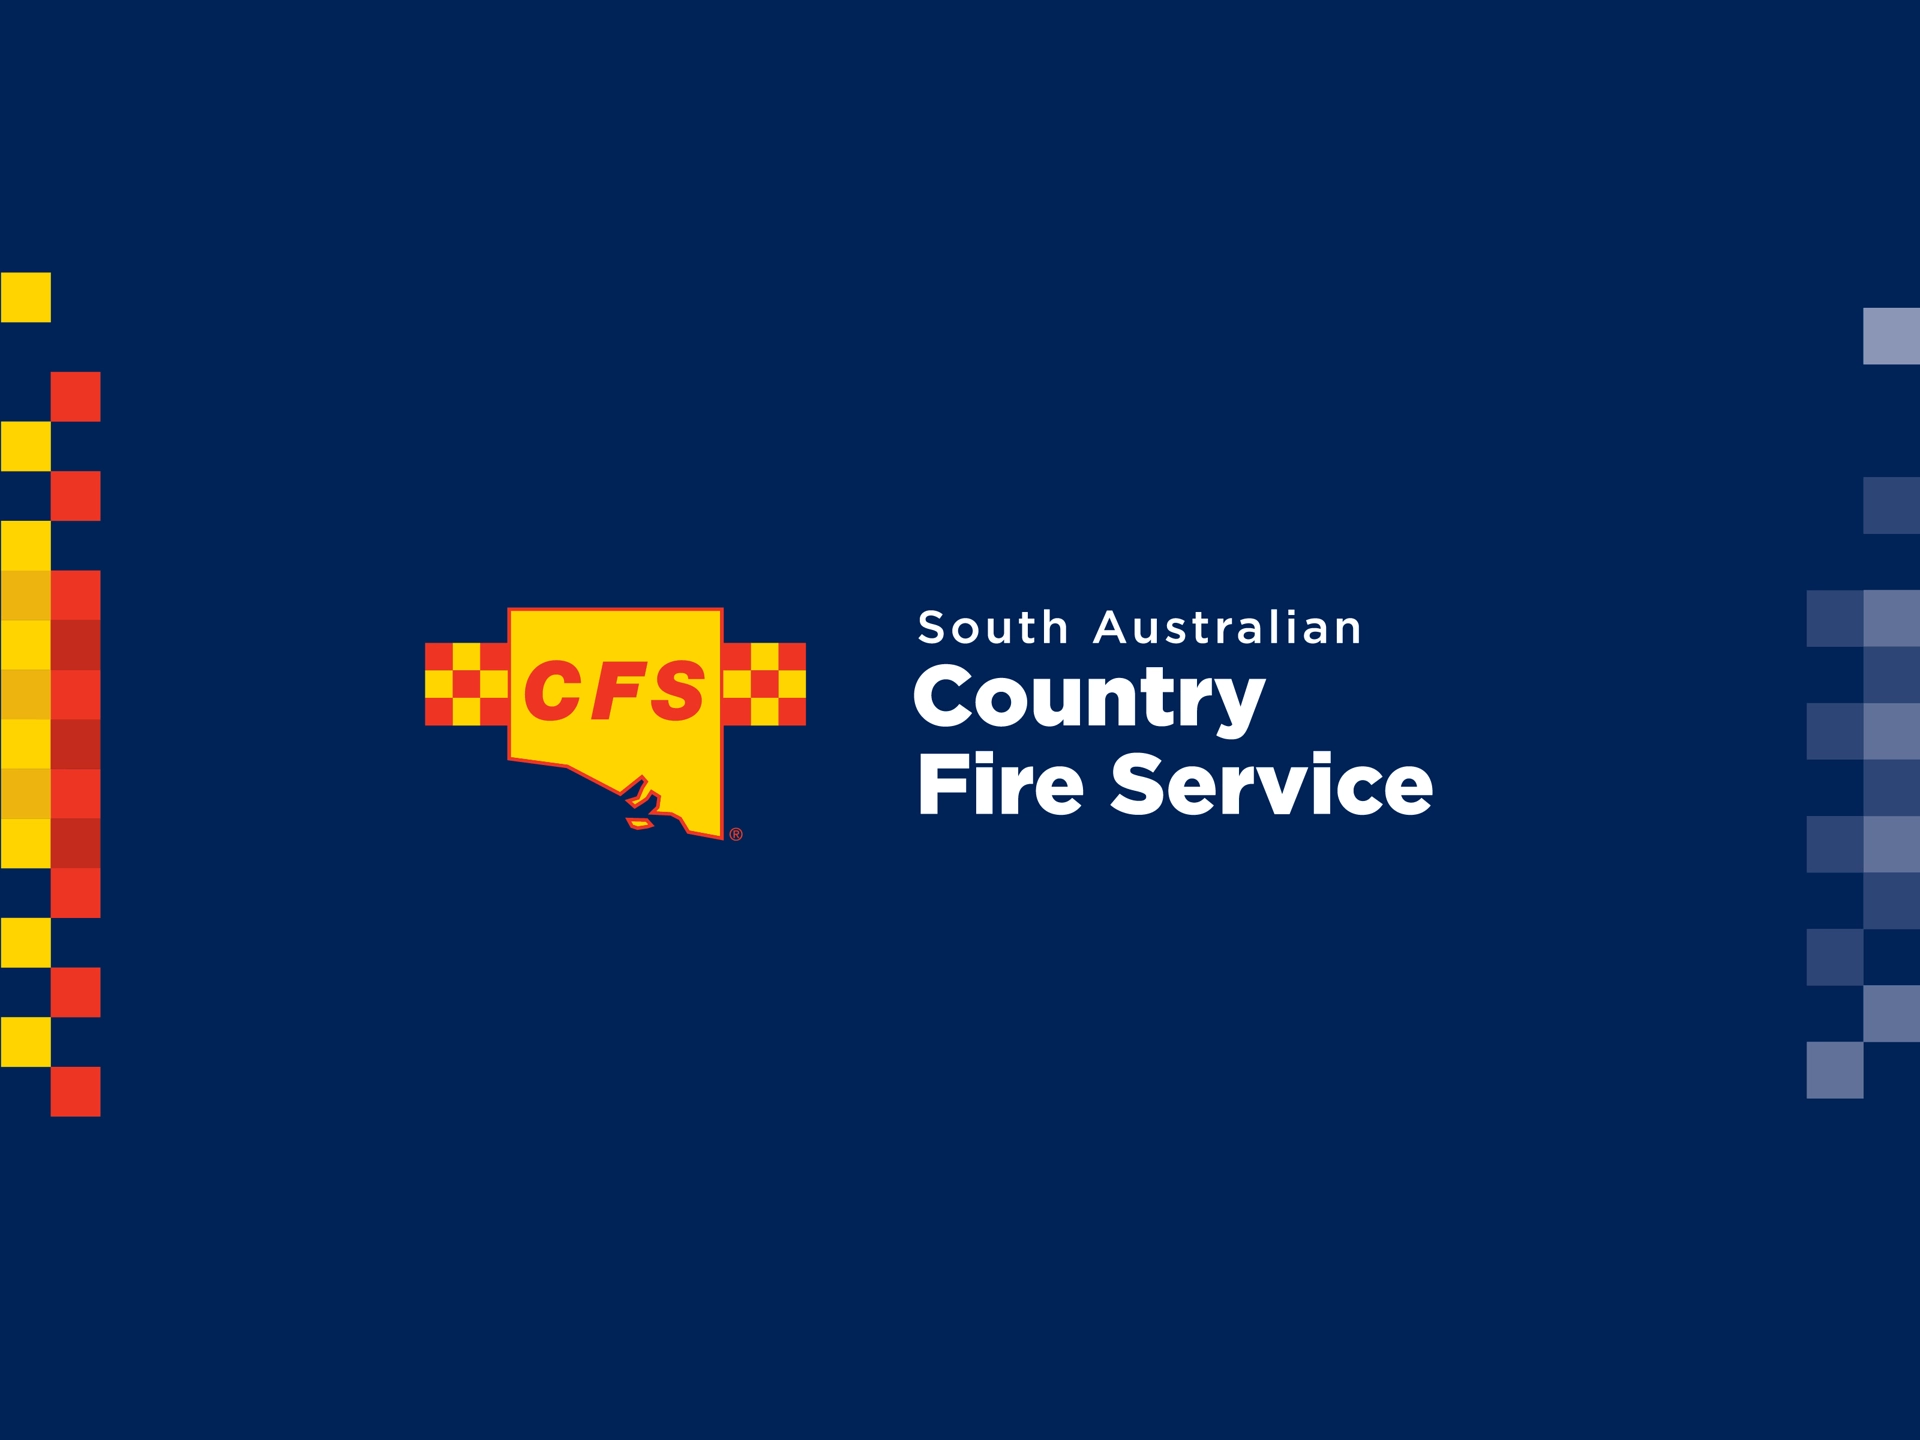 South Australian Country Fire Service (SACFS) - logo and brand overview